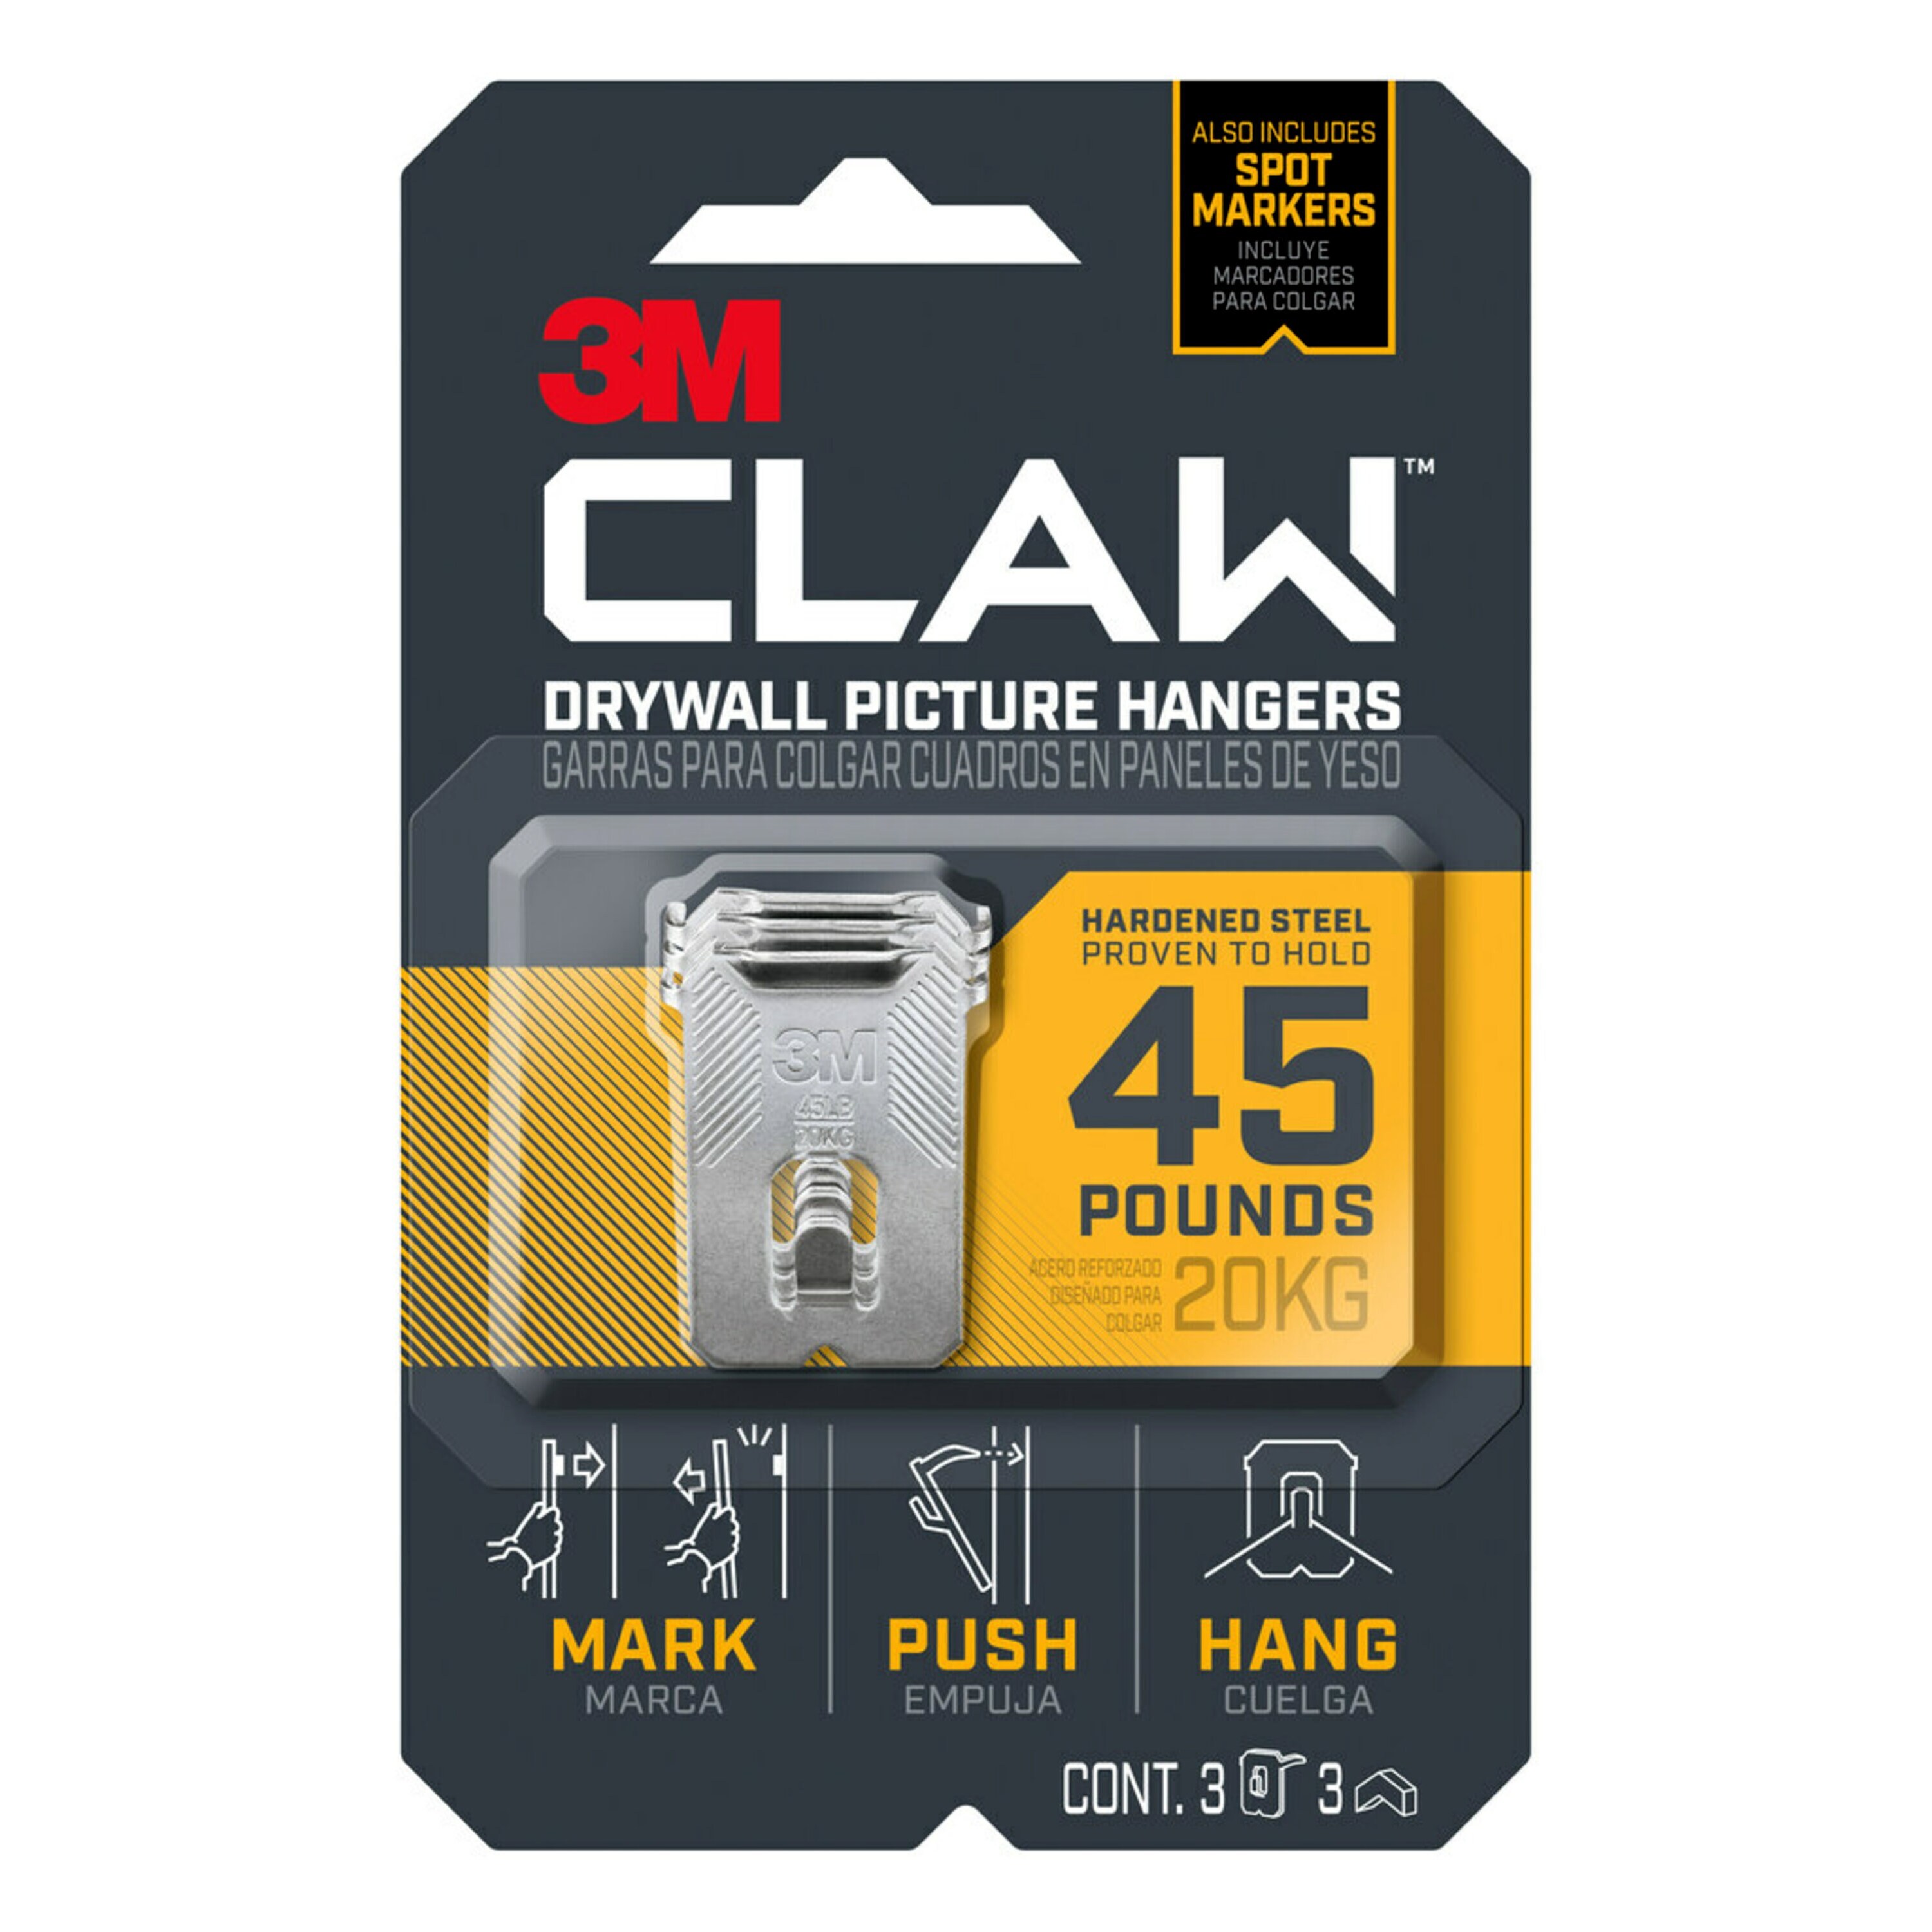 3M CLAW Drywall Picture Hangers 4-Pack Stainless Steel Hanging